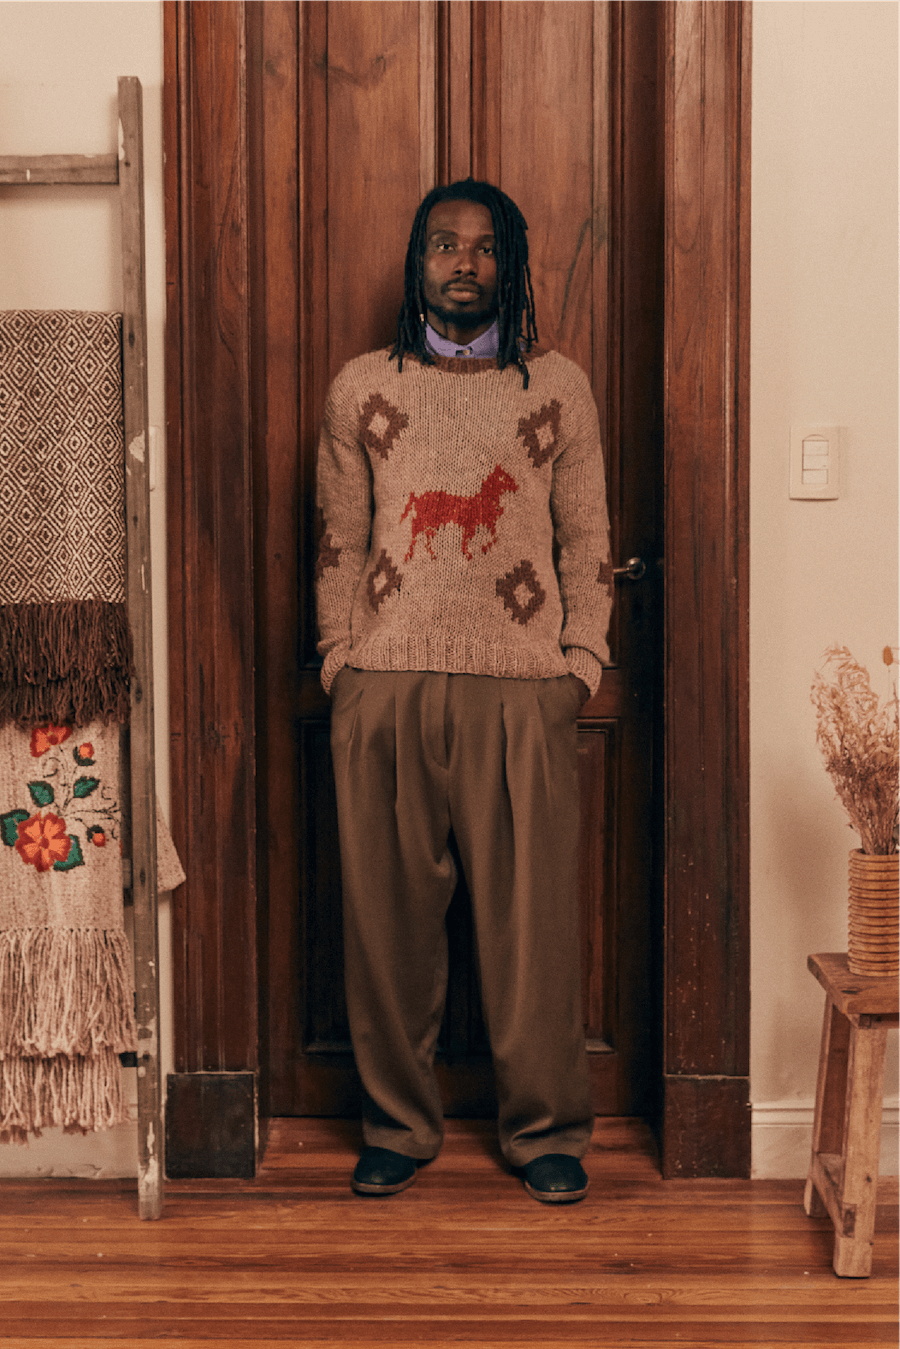 Red Horse Hand-Knitted Llama Sweater